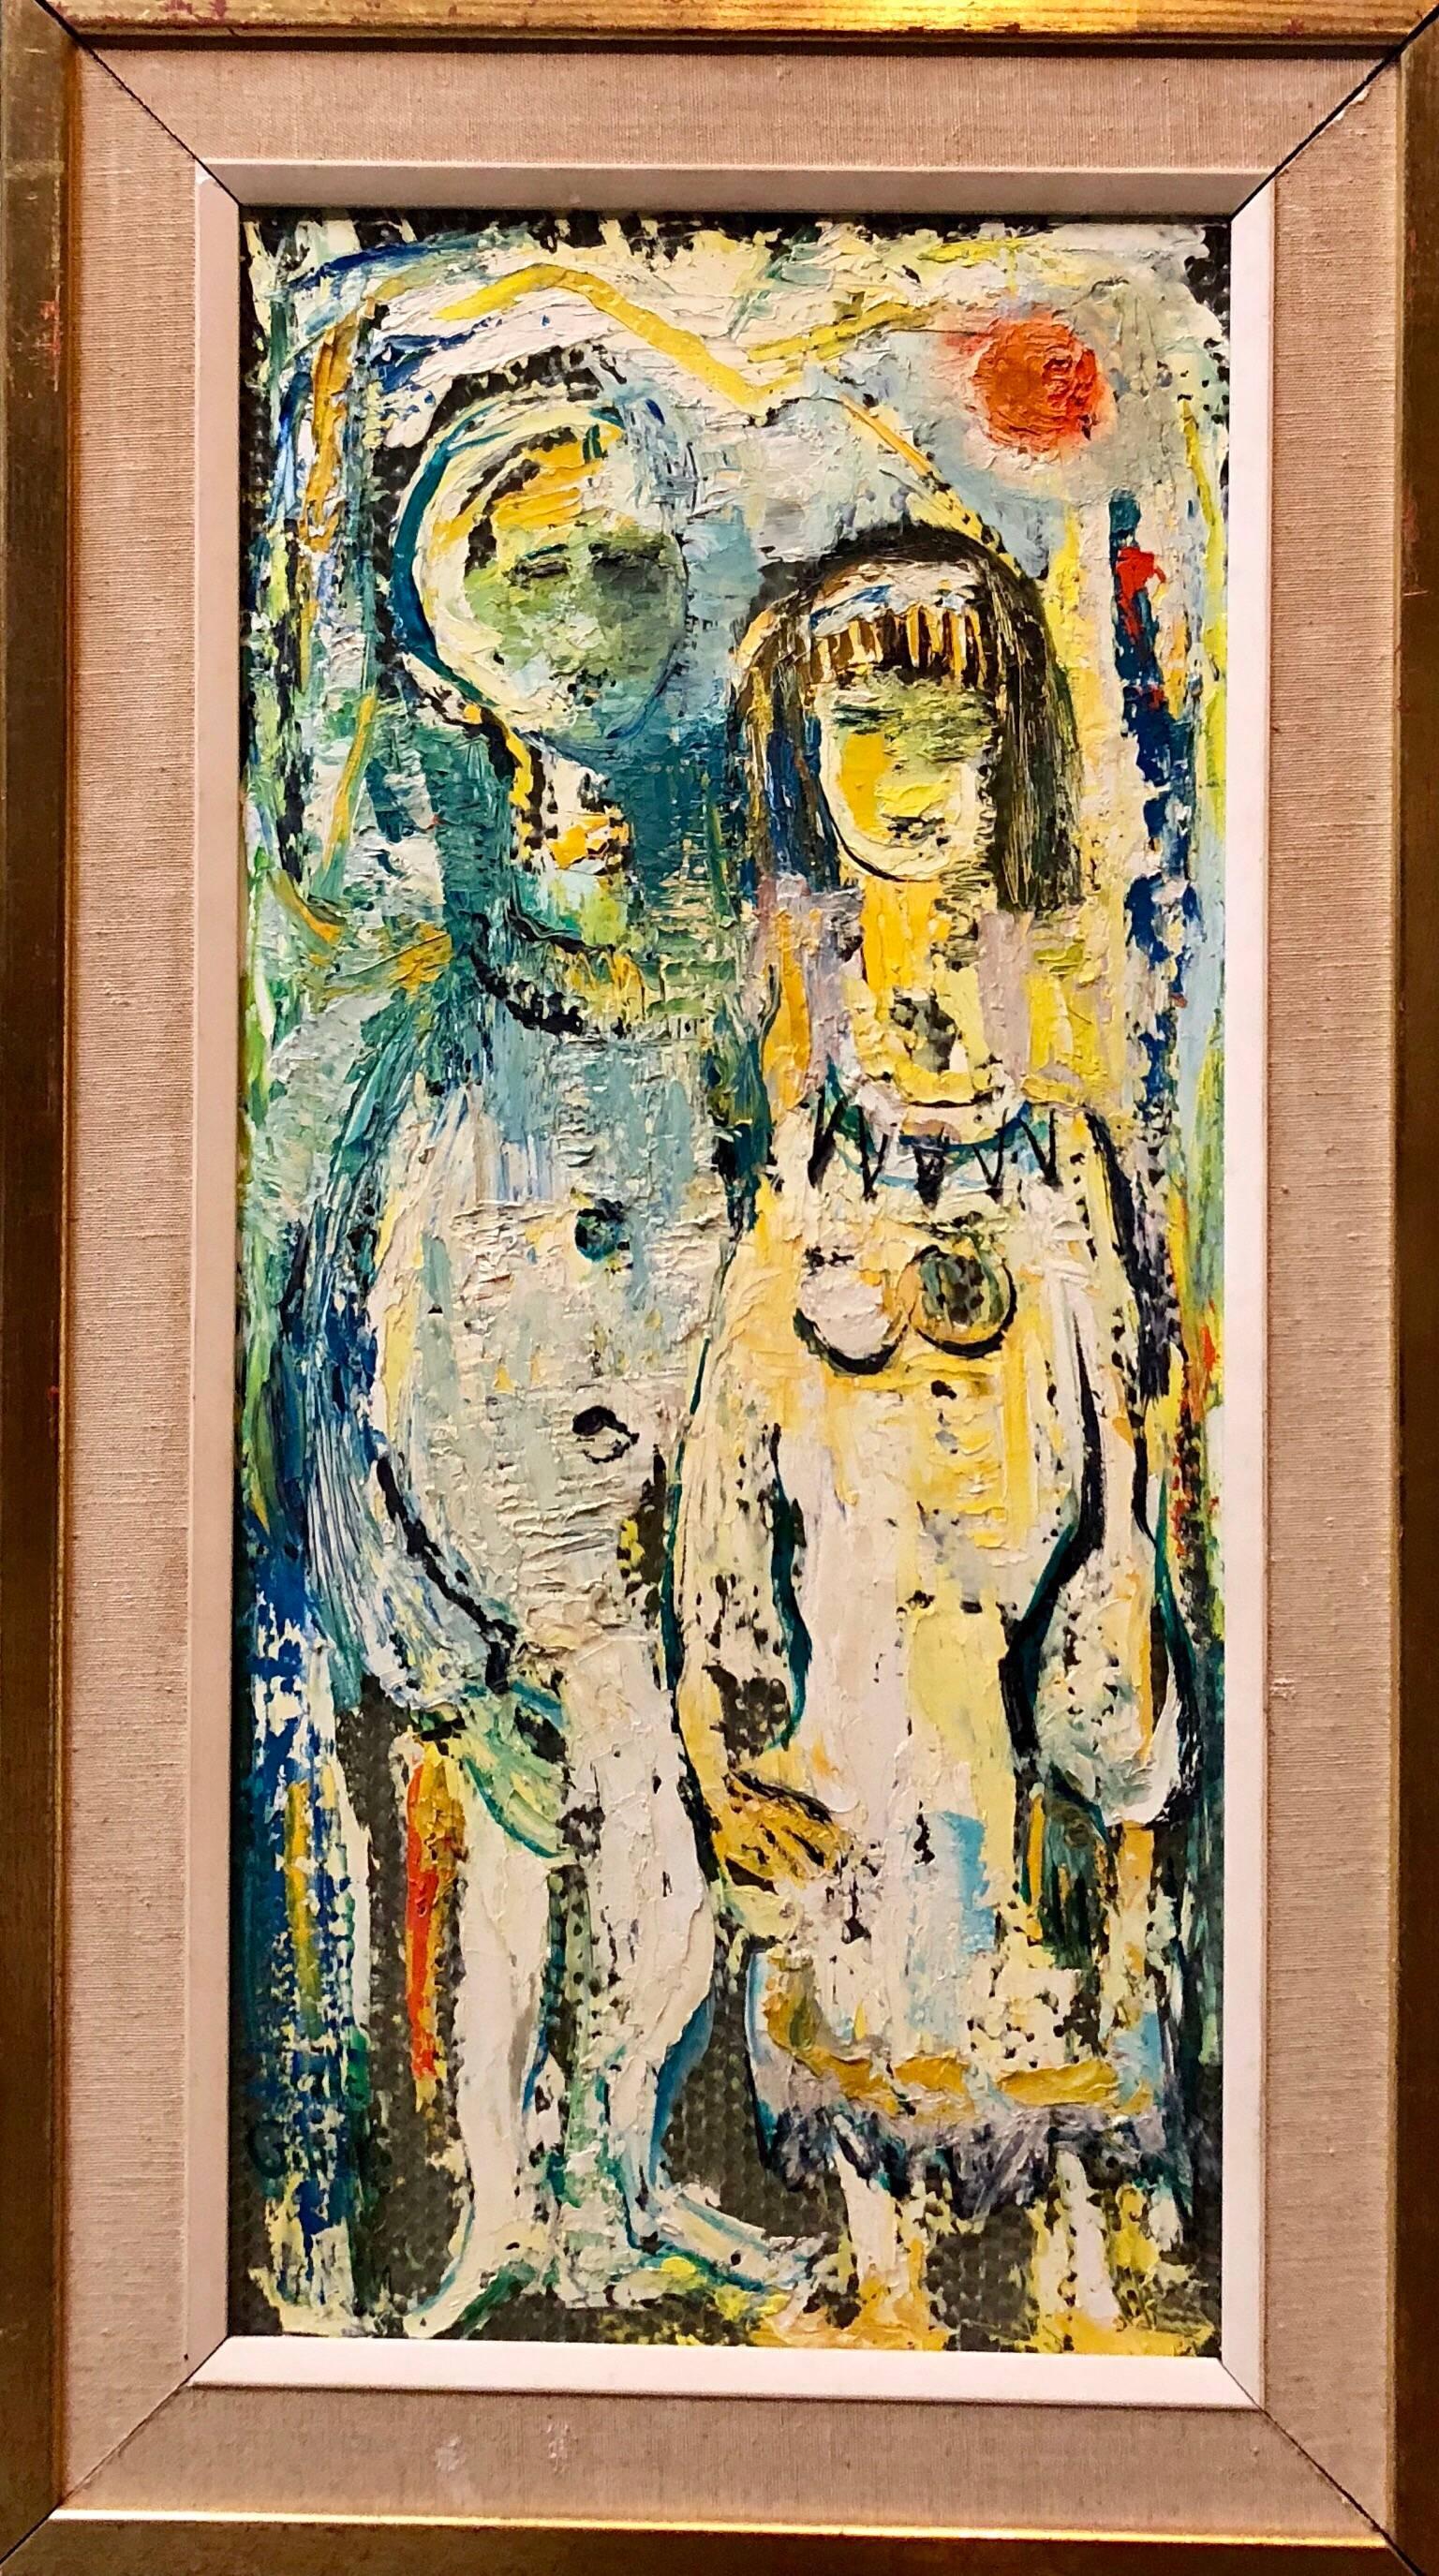 Abstracted painting of a man and a woman, the paint has been applied to textured plastic.

An abstracted painting of a couple applying paint to the textured plastic surface. Genre Expressionist Fauvist Subject People Medium Acrylic Plastic Surface